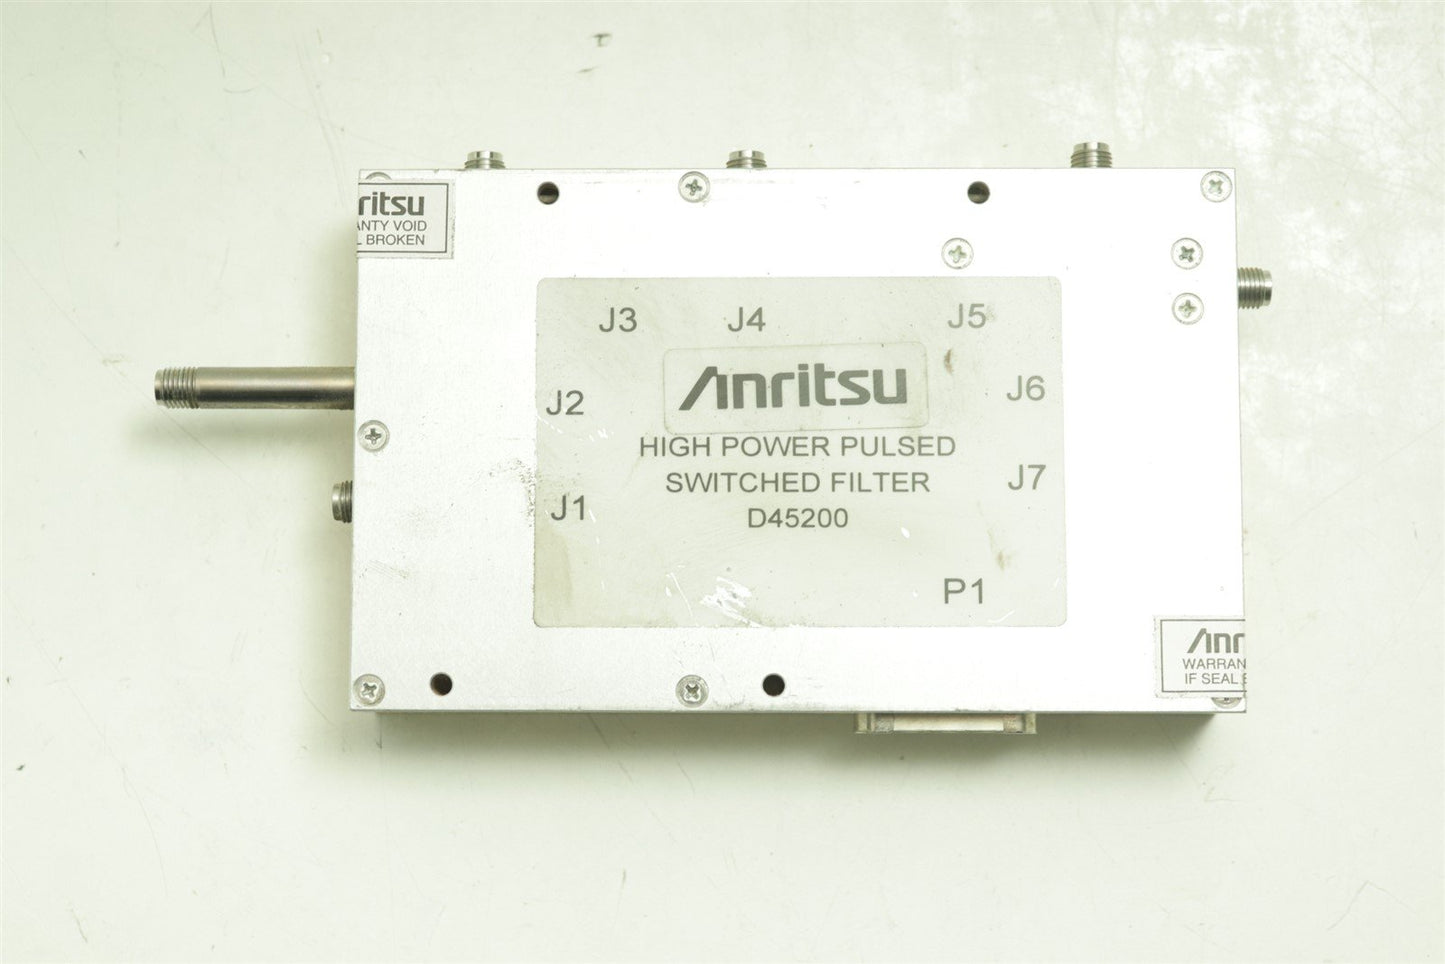 Anritsu D45200 High Power Pulsed Switched Filter